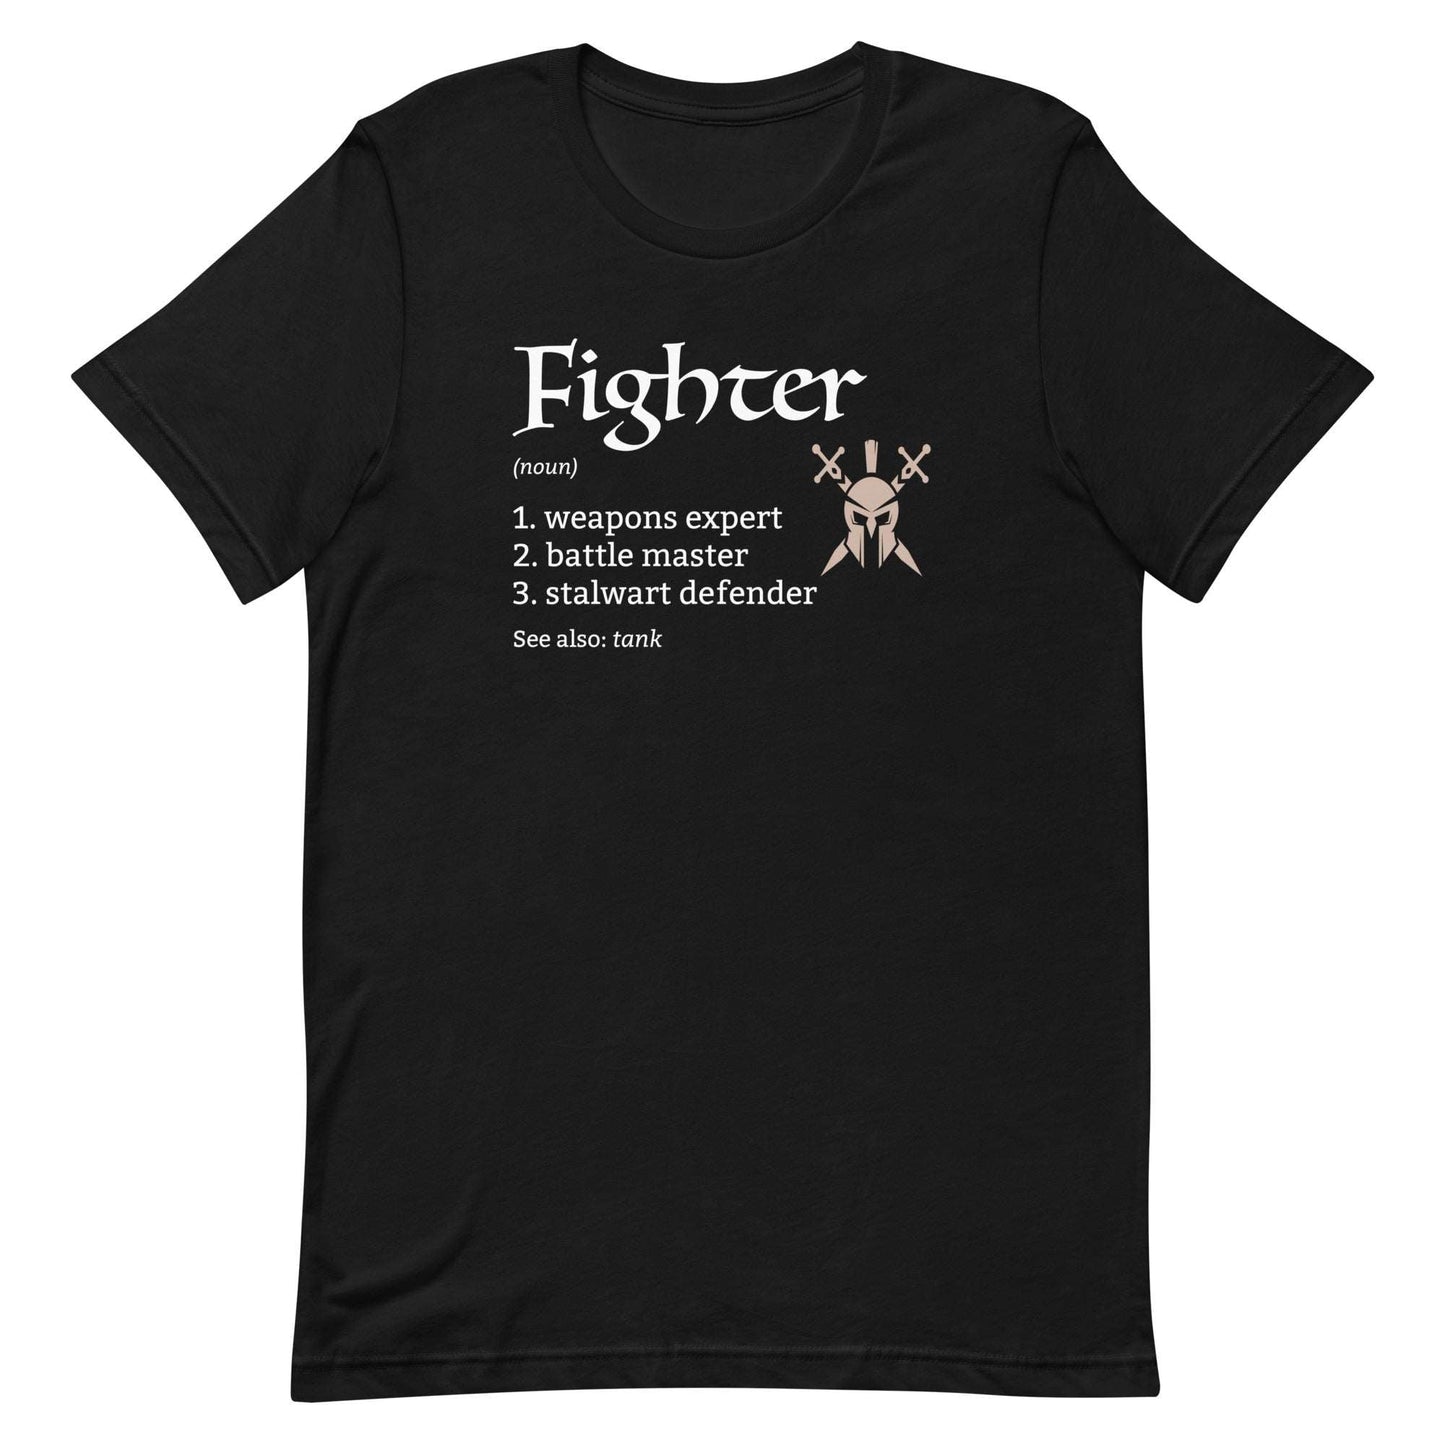 Fighter Class Definition T-Shirt – Funny DnD Definition Tee T-Shirt Black / S